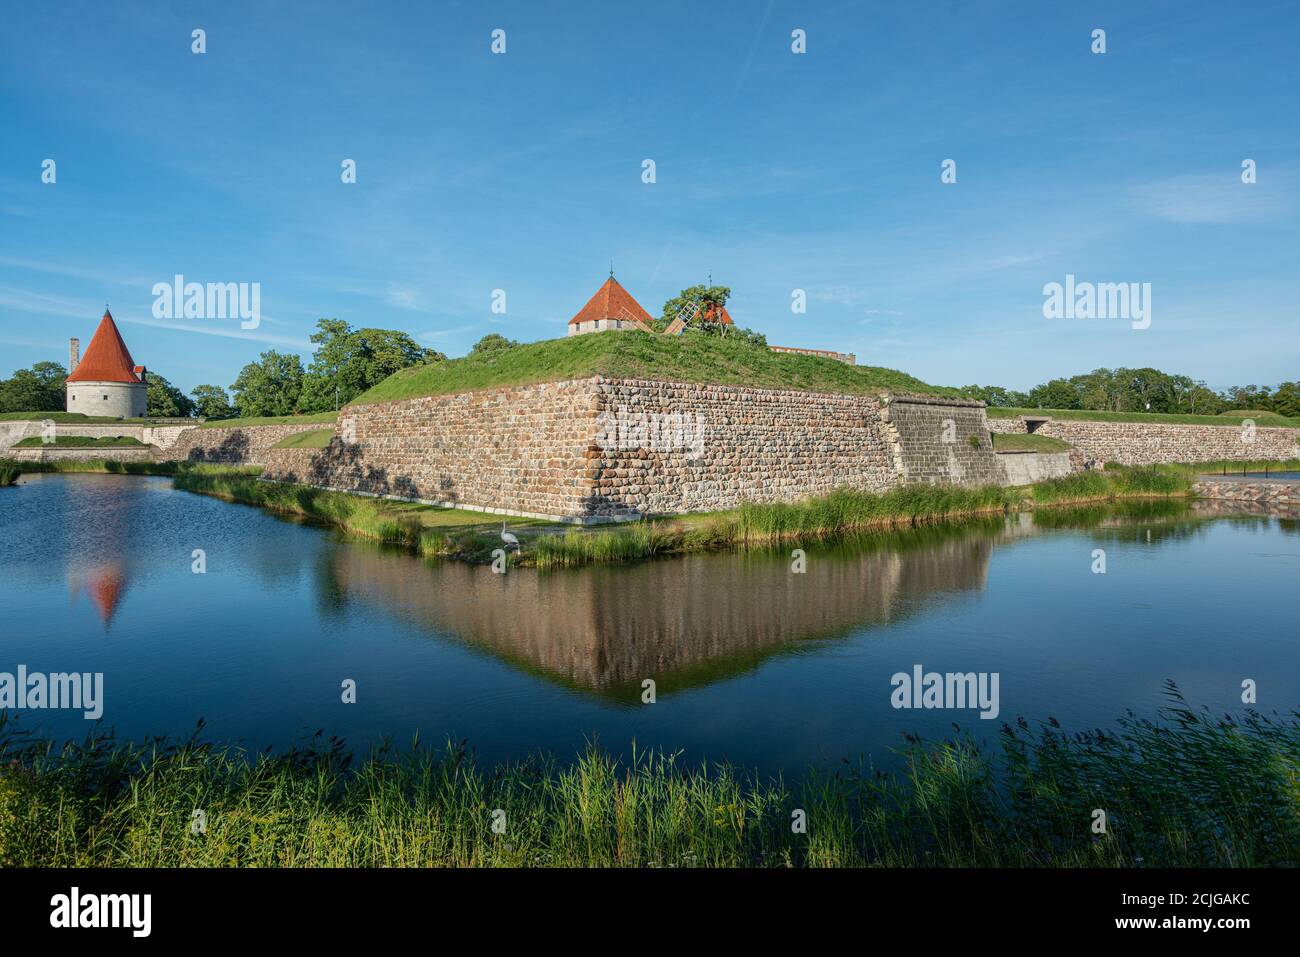 The convent building of the Kuressaare Episcopal Castle on Saaremaa island. The first written message about the Kuressaare Castle dates back to 1381. Stock Photo